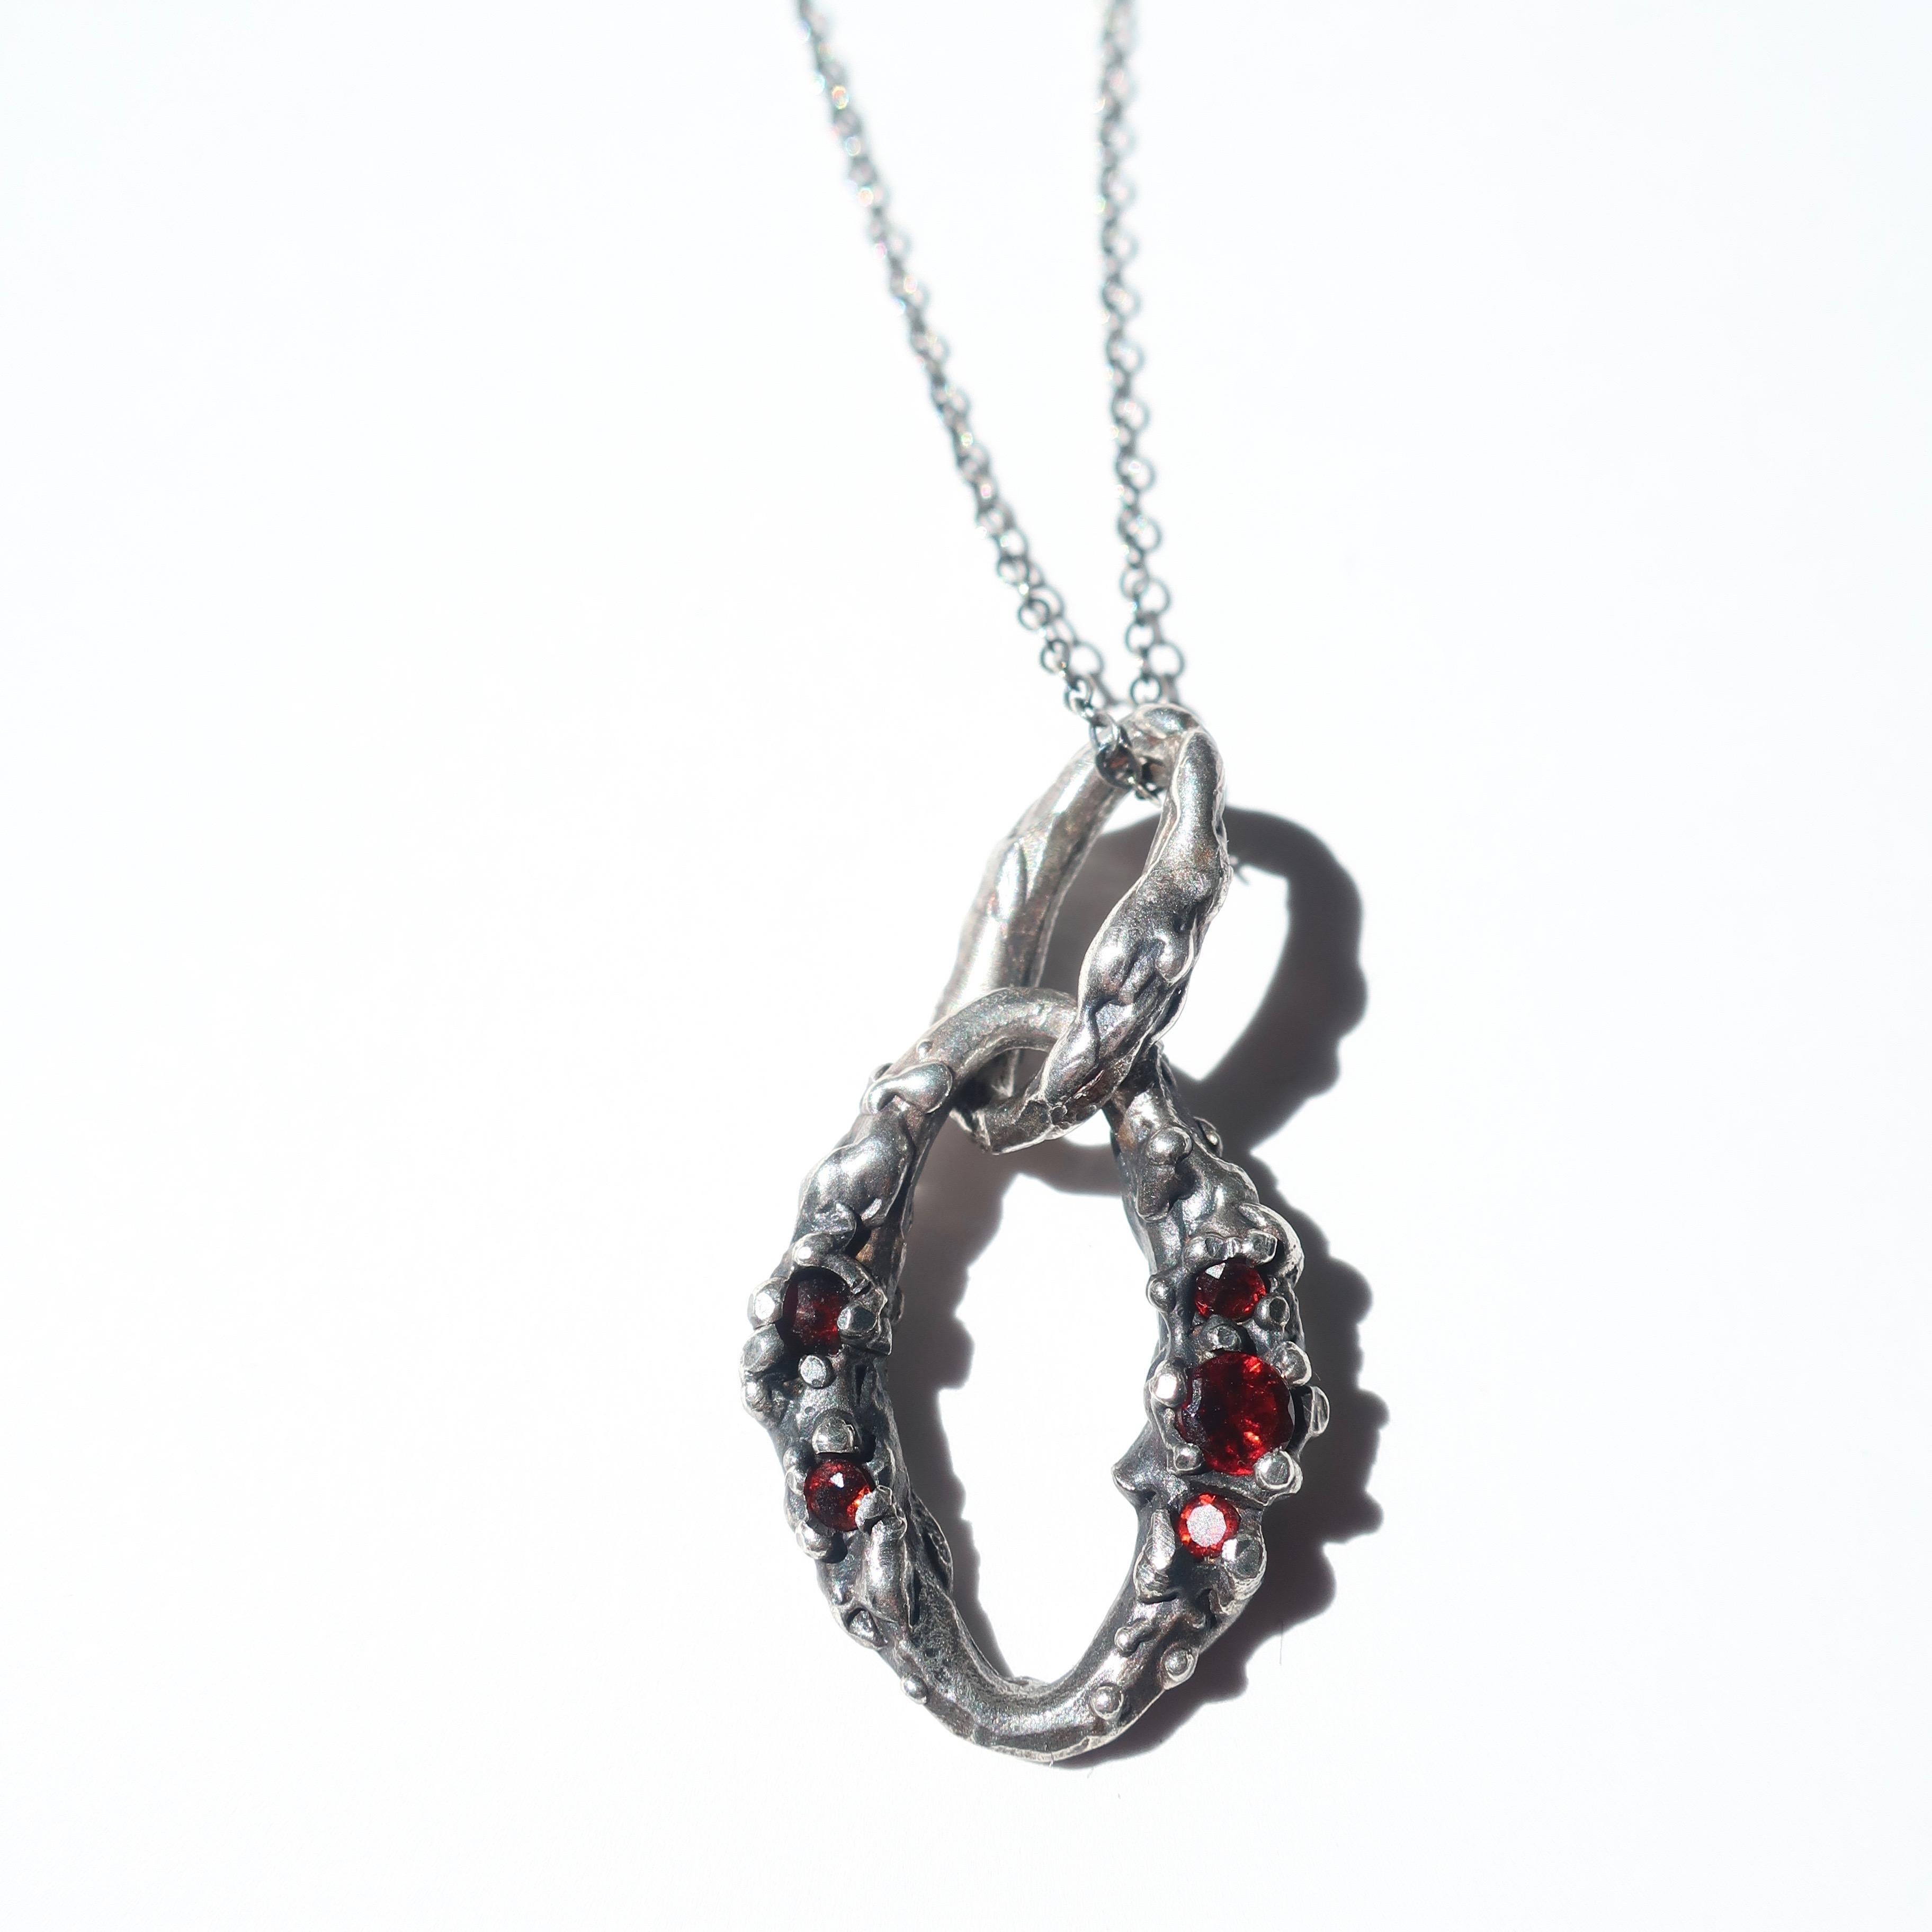 Hand crafted sterling silver pendant with a range of 3-2mm garnets on a 20 inch sterling silver chain. Pendant measures 2 inches in length. 